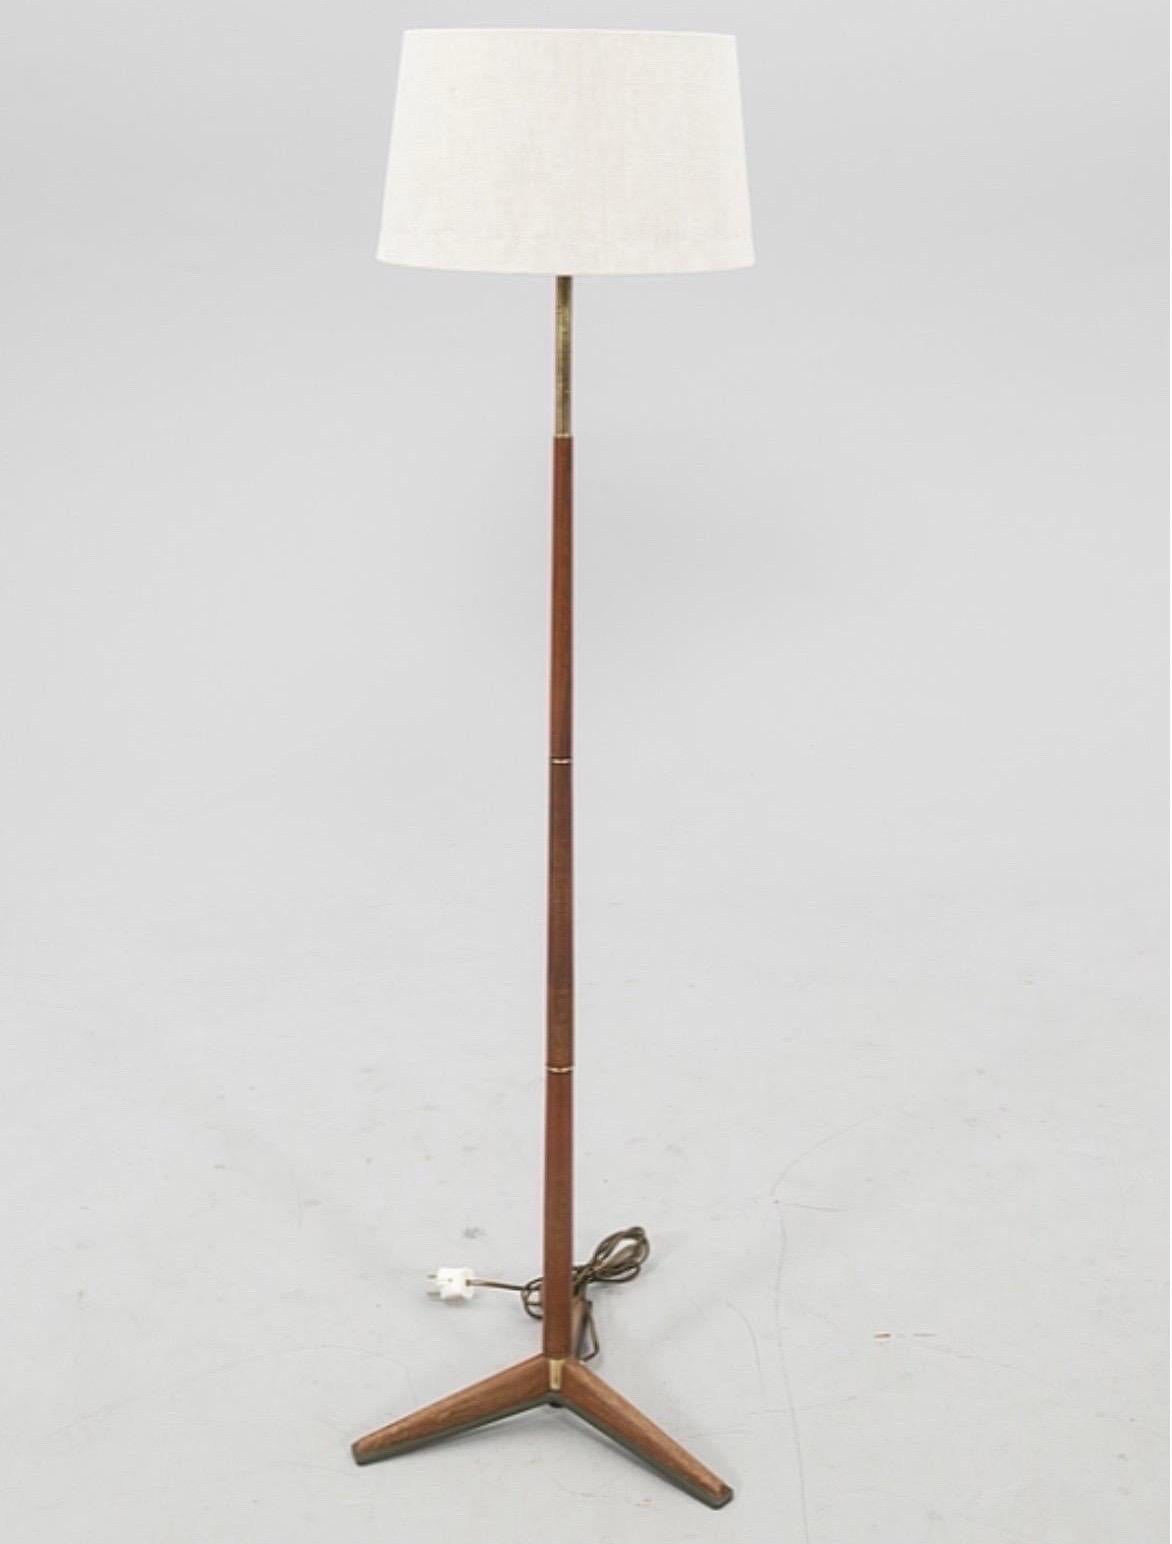 20th Century Pair of Swedish Floor Lamps, Teak and brass, Sweden 1960 For Sale